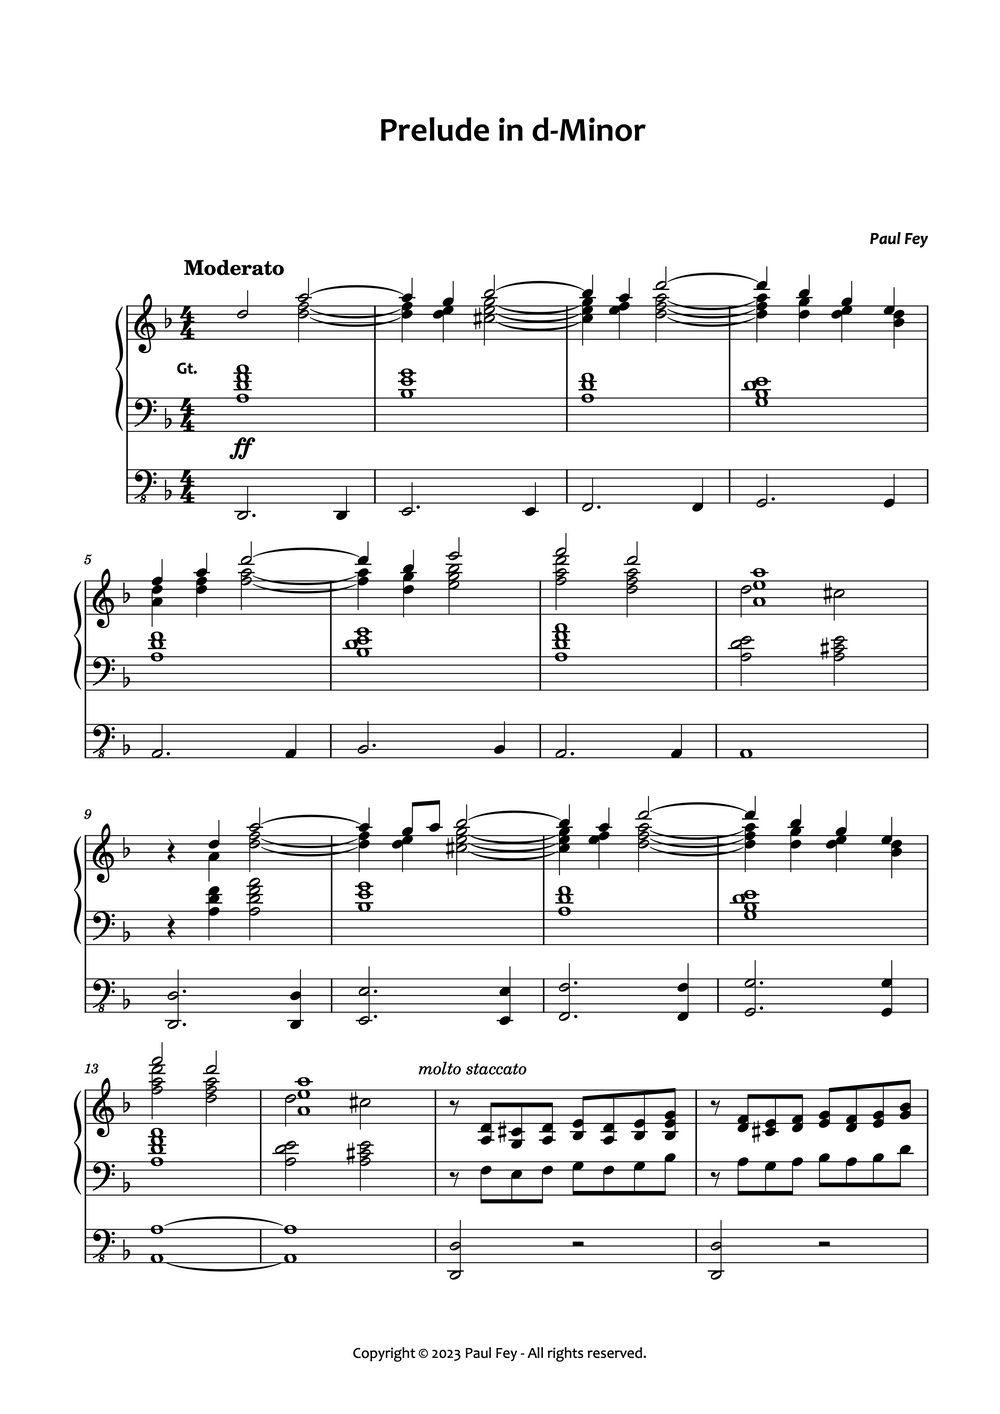 Prelude in d-Minor (Sheet Music) - Music for Organ by paul fey organist 